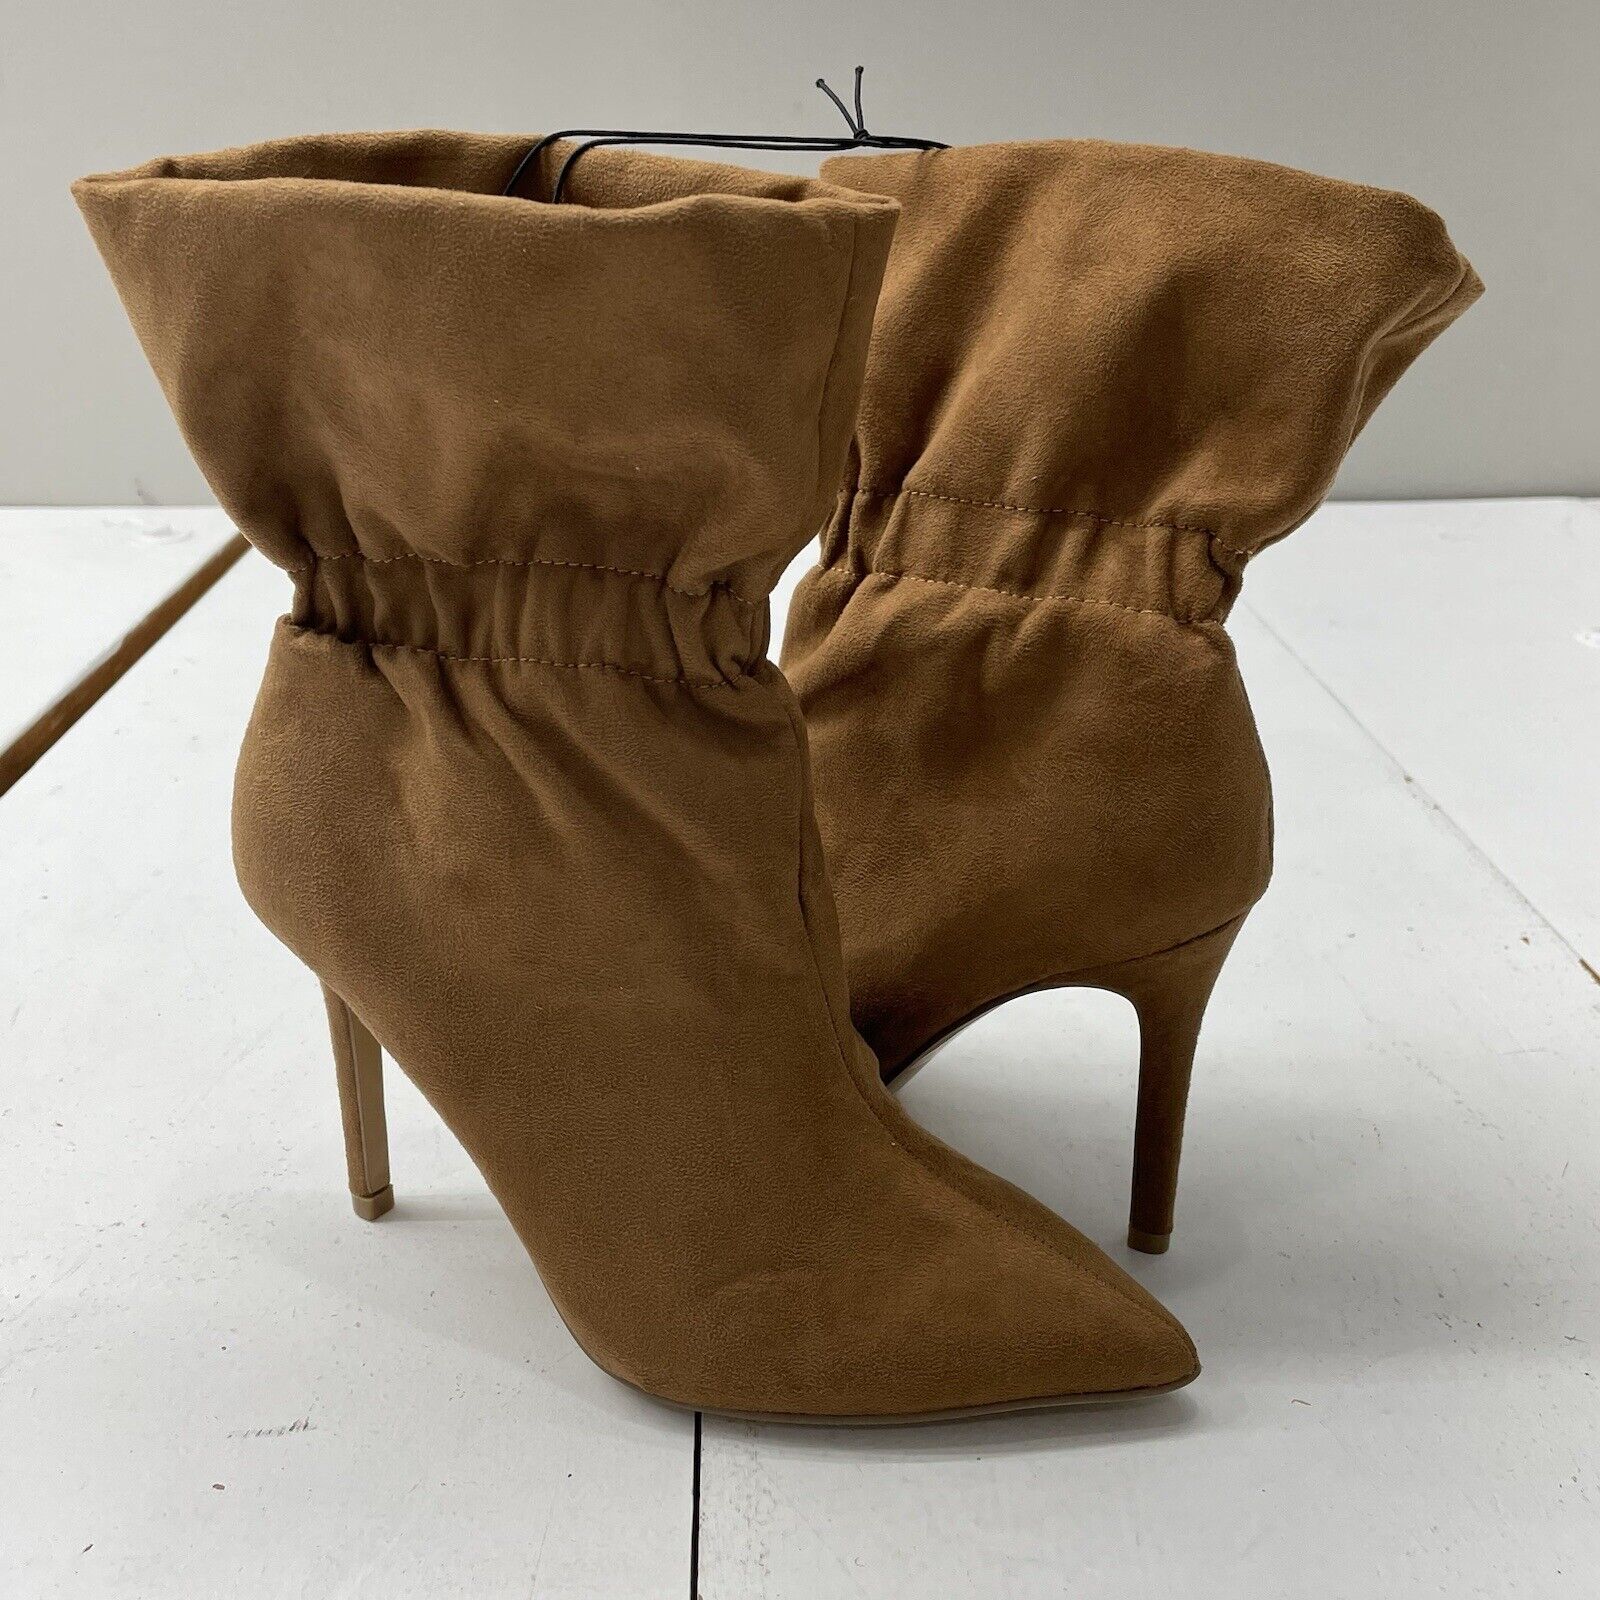 Express Brown Suede Heel Boots Paper Bag Booties Womens Size 7.5 NEW